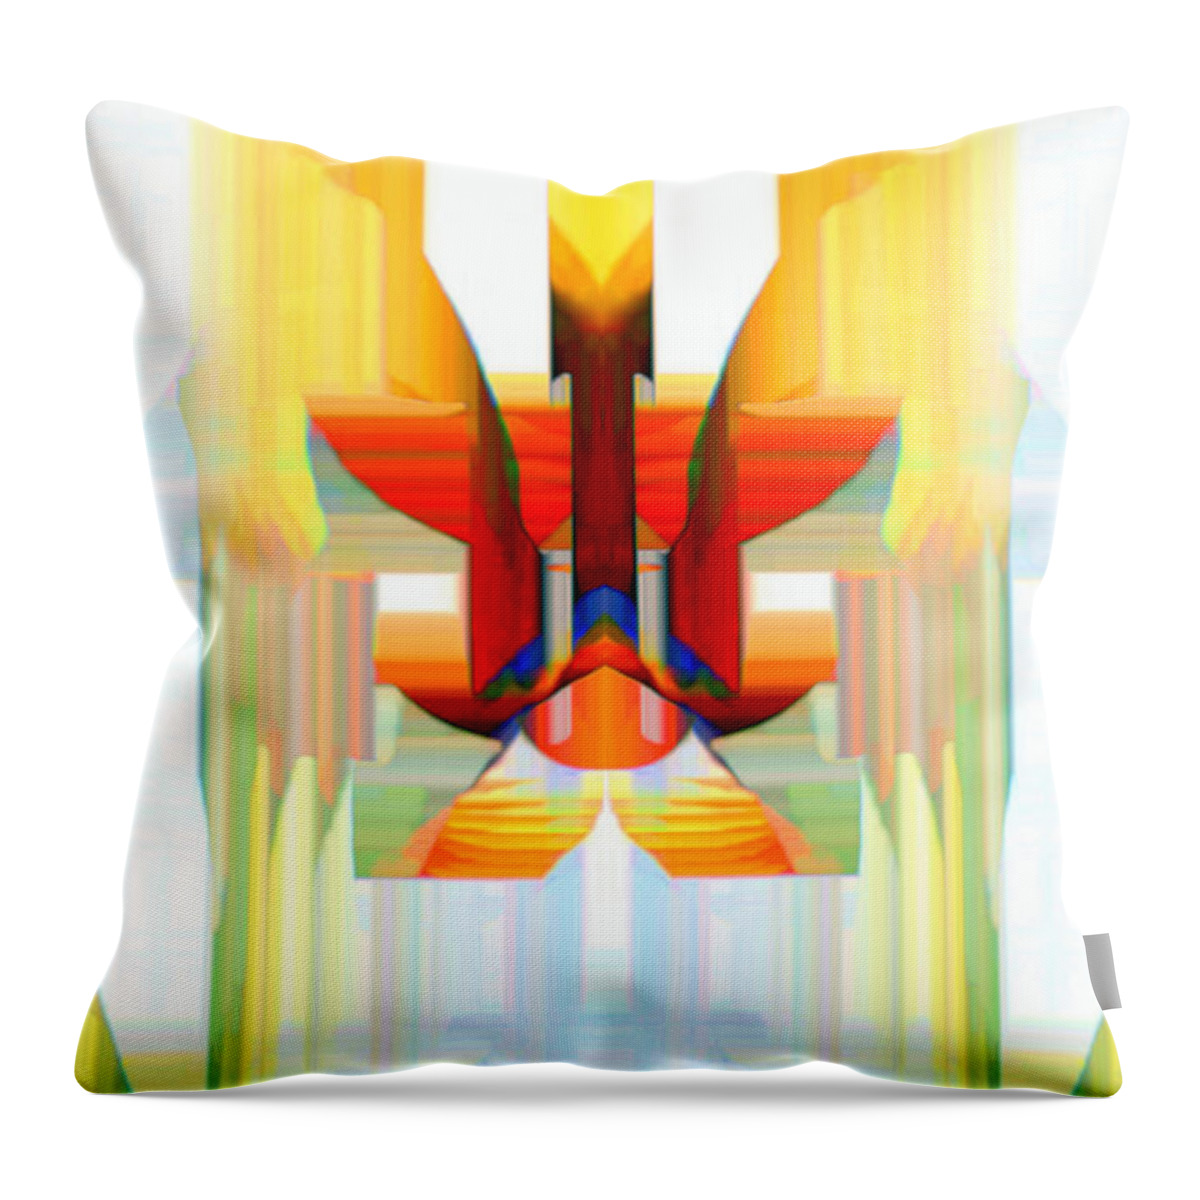 Welcome Throw Pillow featuring the digital art Gates Of by Rafael Salazar